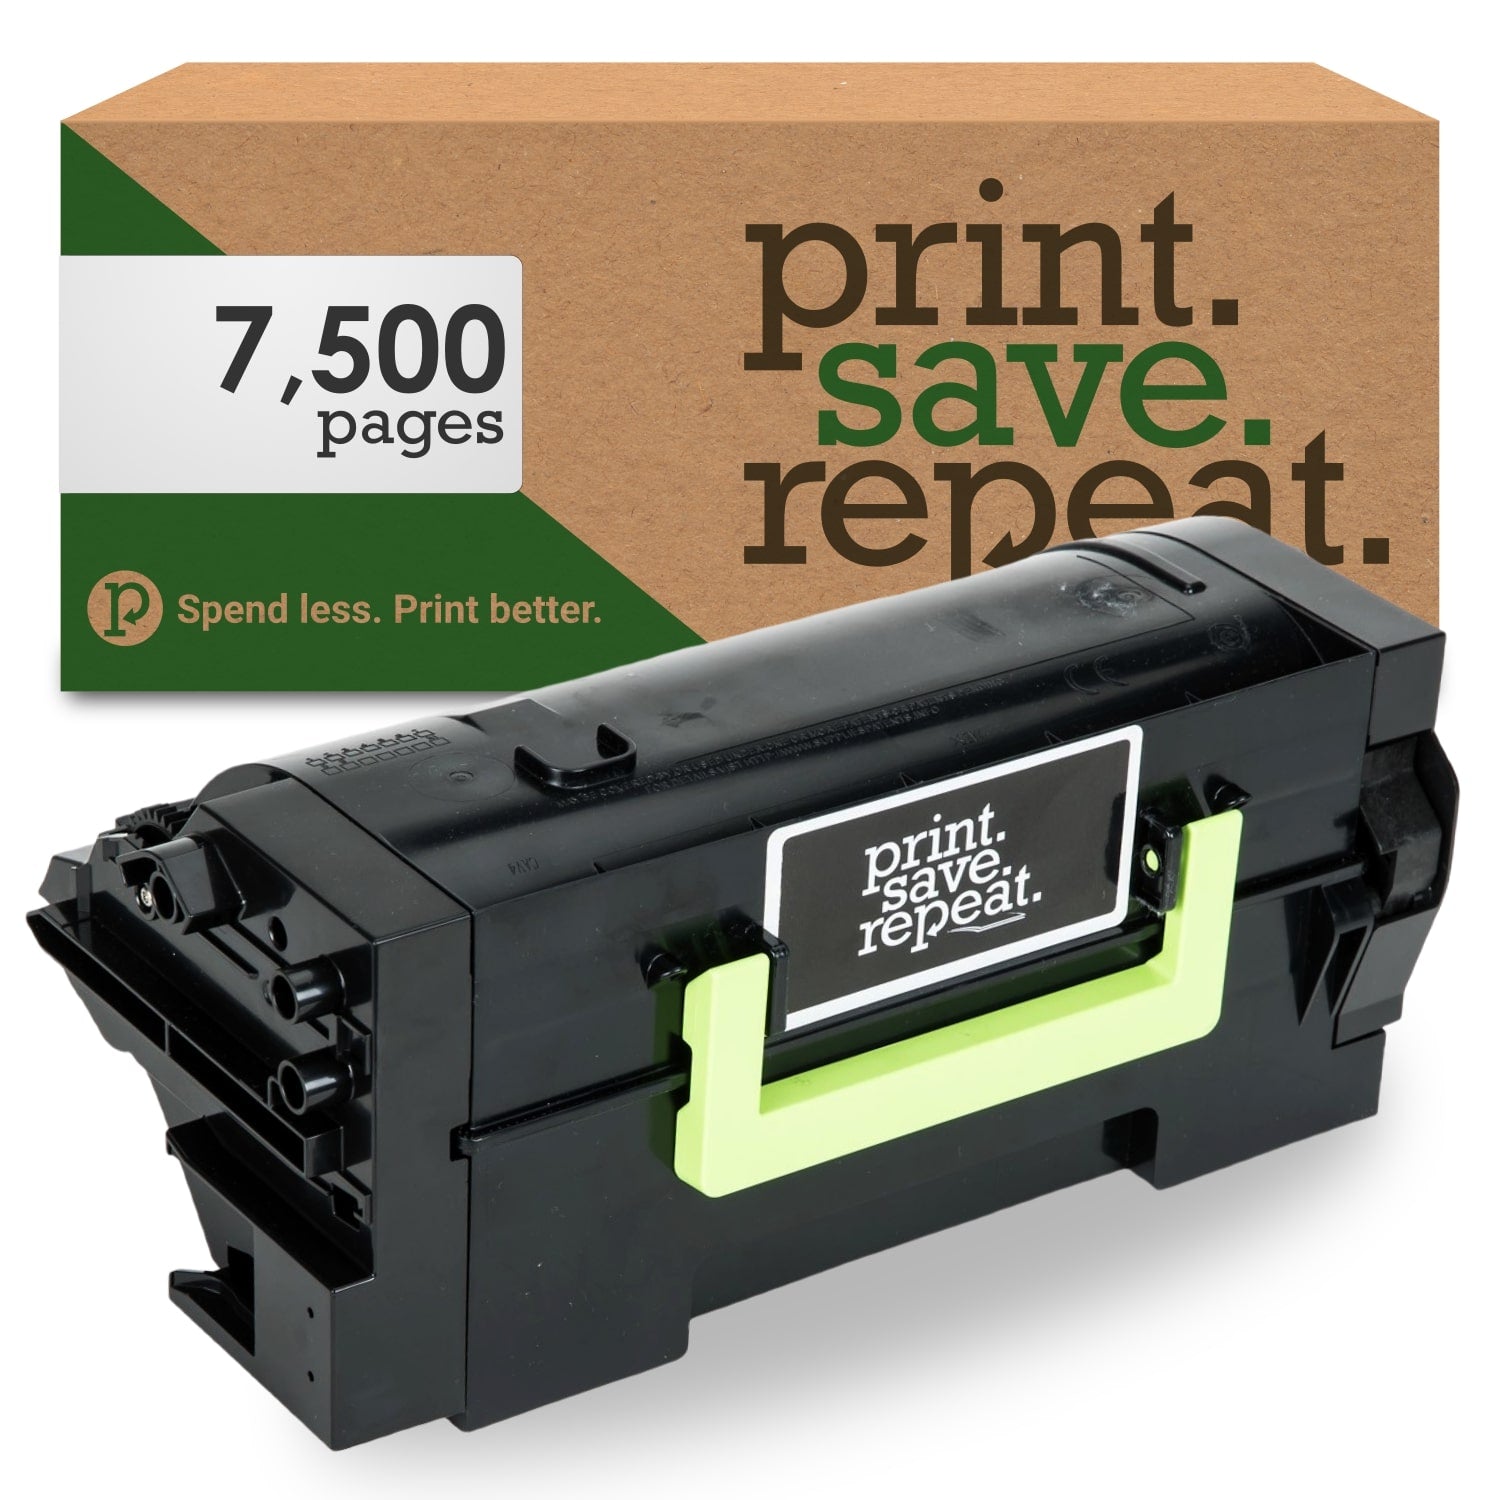 Print.Save.Repeat. Lexmark 58D1000 Standard Yield Remanufactured Toner Cartridge for MS725, MS821, MS822, MS823, MS824, MS825, MS826, MX721, MX722, MX725, MX822, MX824, MX826 [7,500 Pages]